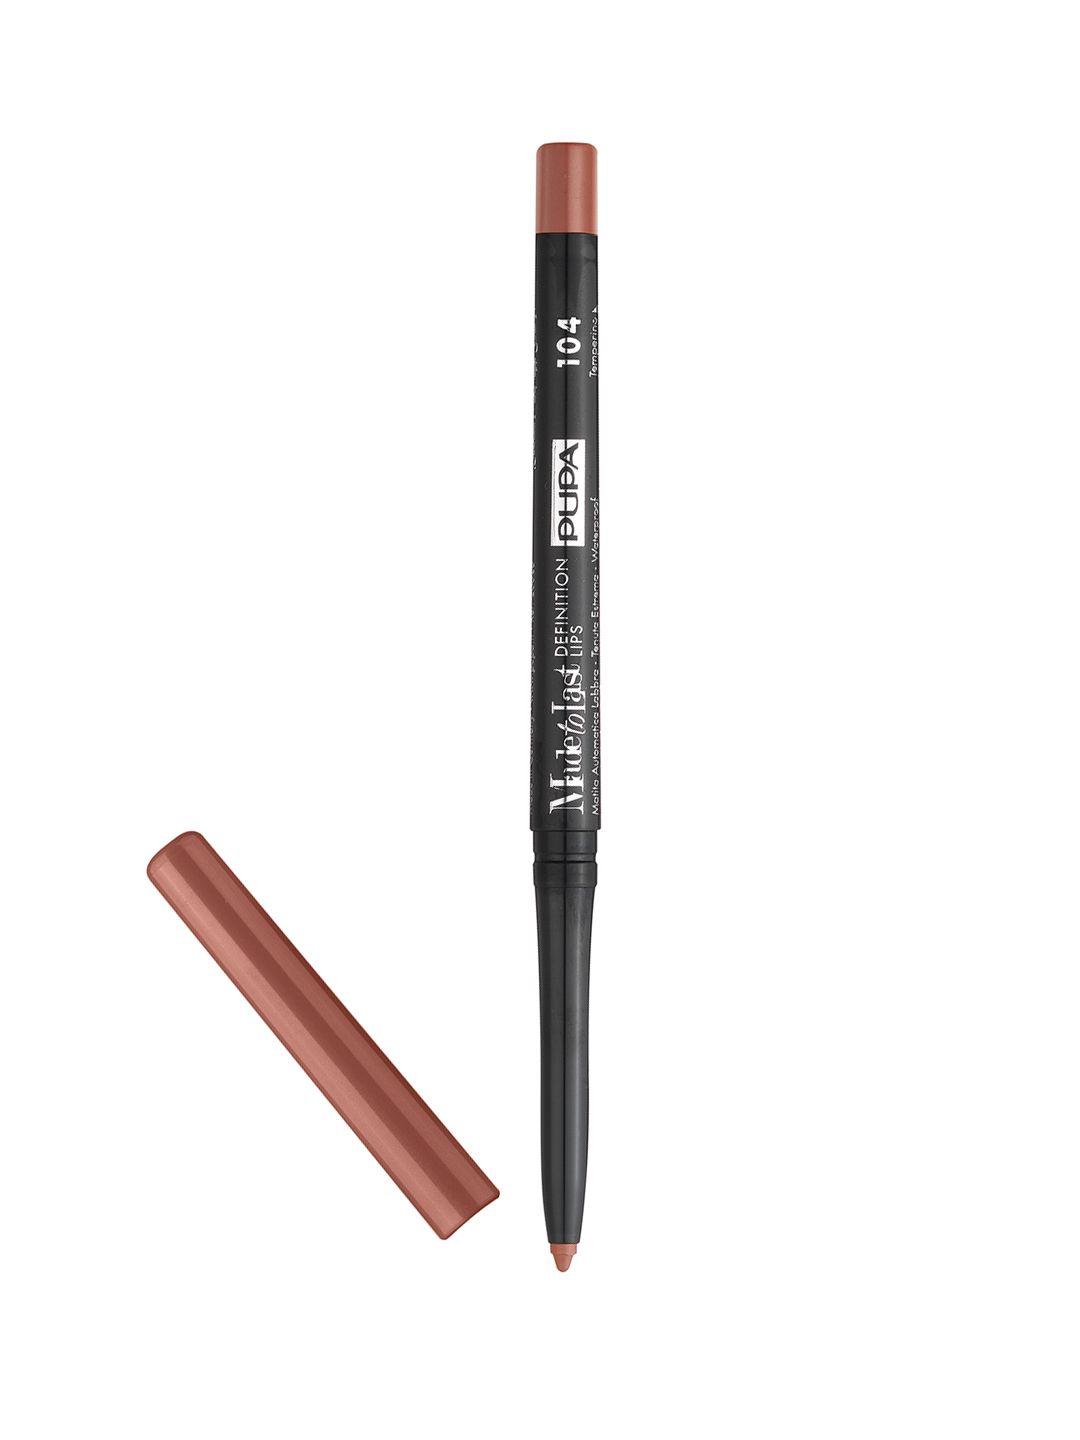 pupa milano made to last definition lips waterproof automatic lip pencil - rosewood 104